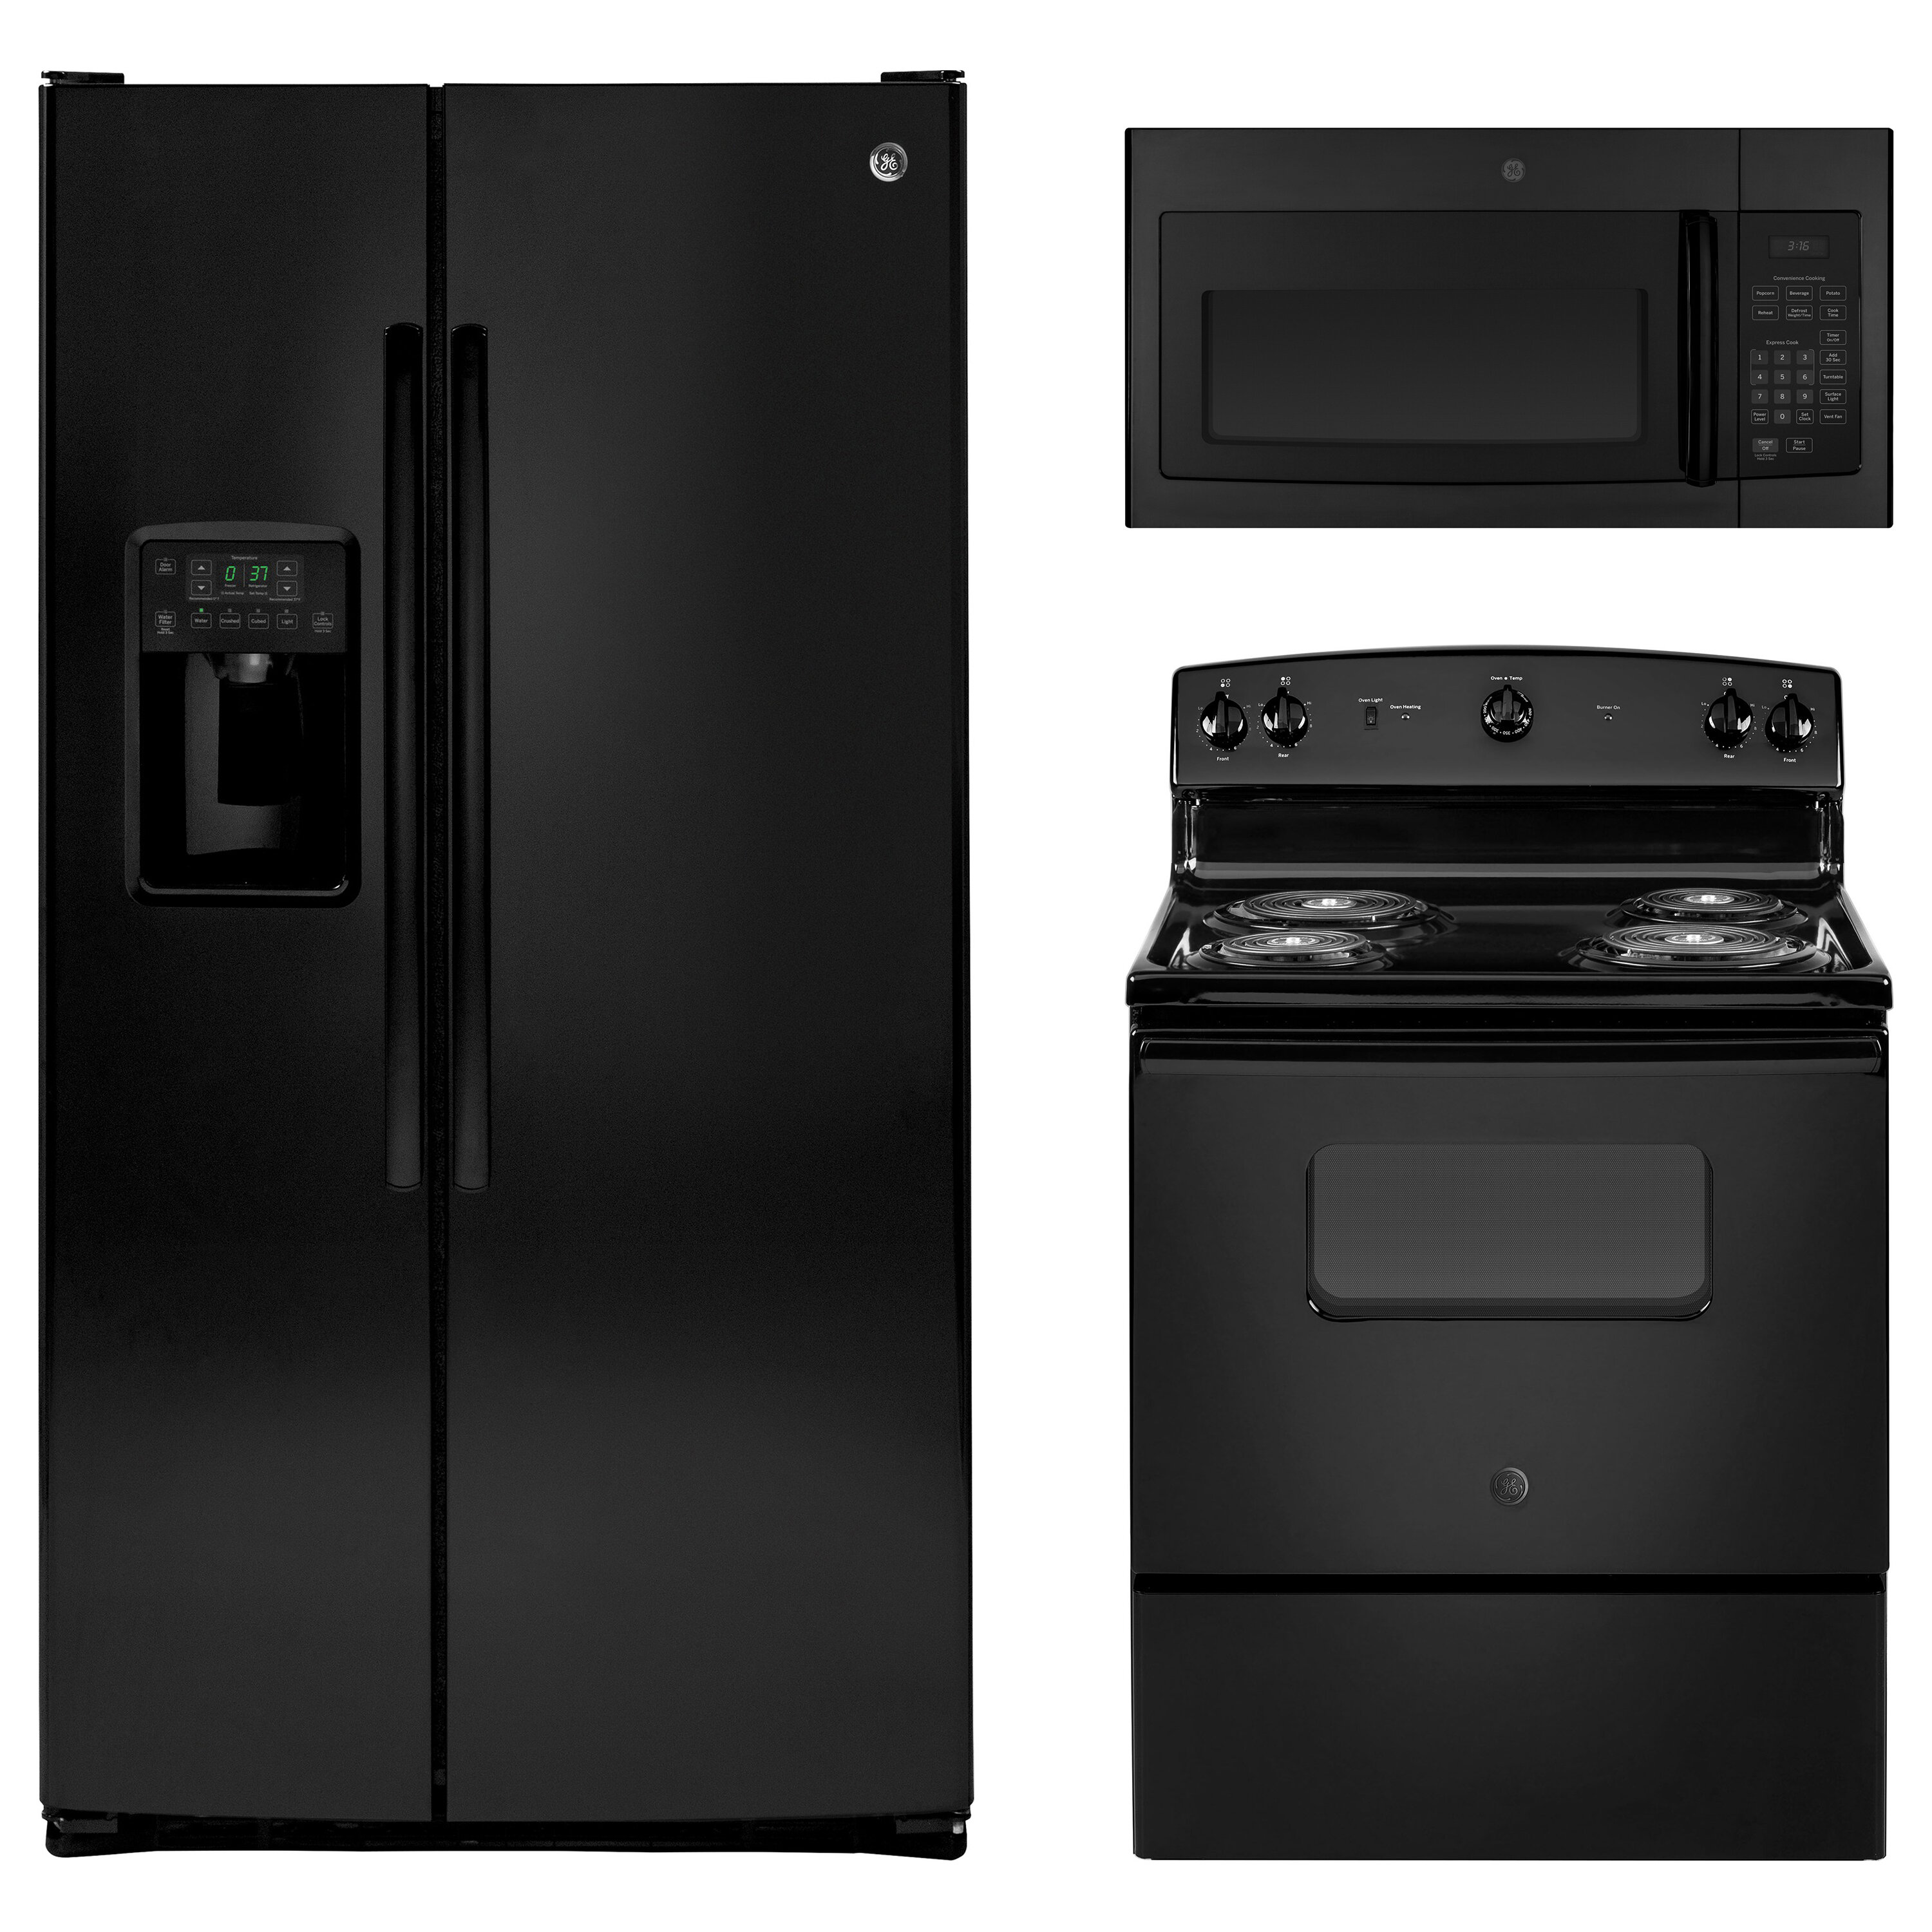 Ge Appliances 3 Piece Kitchen Package With Side By Side Refrigerator 30 Freestanding Electric Range Reviews Wayfair